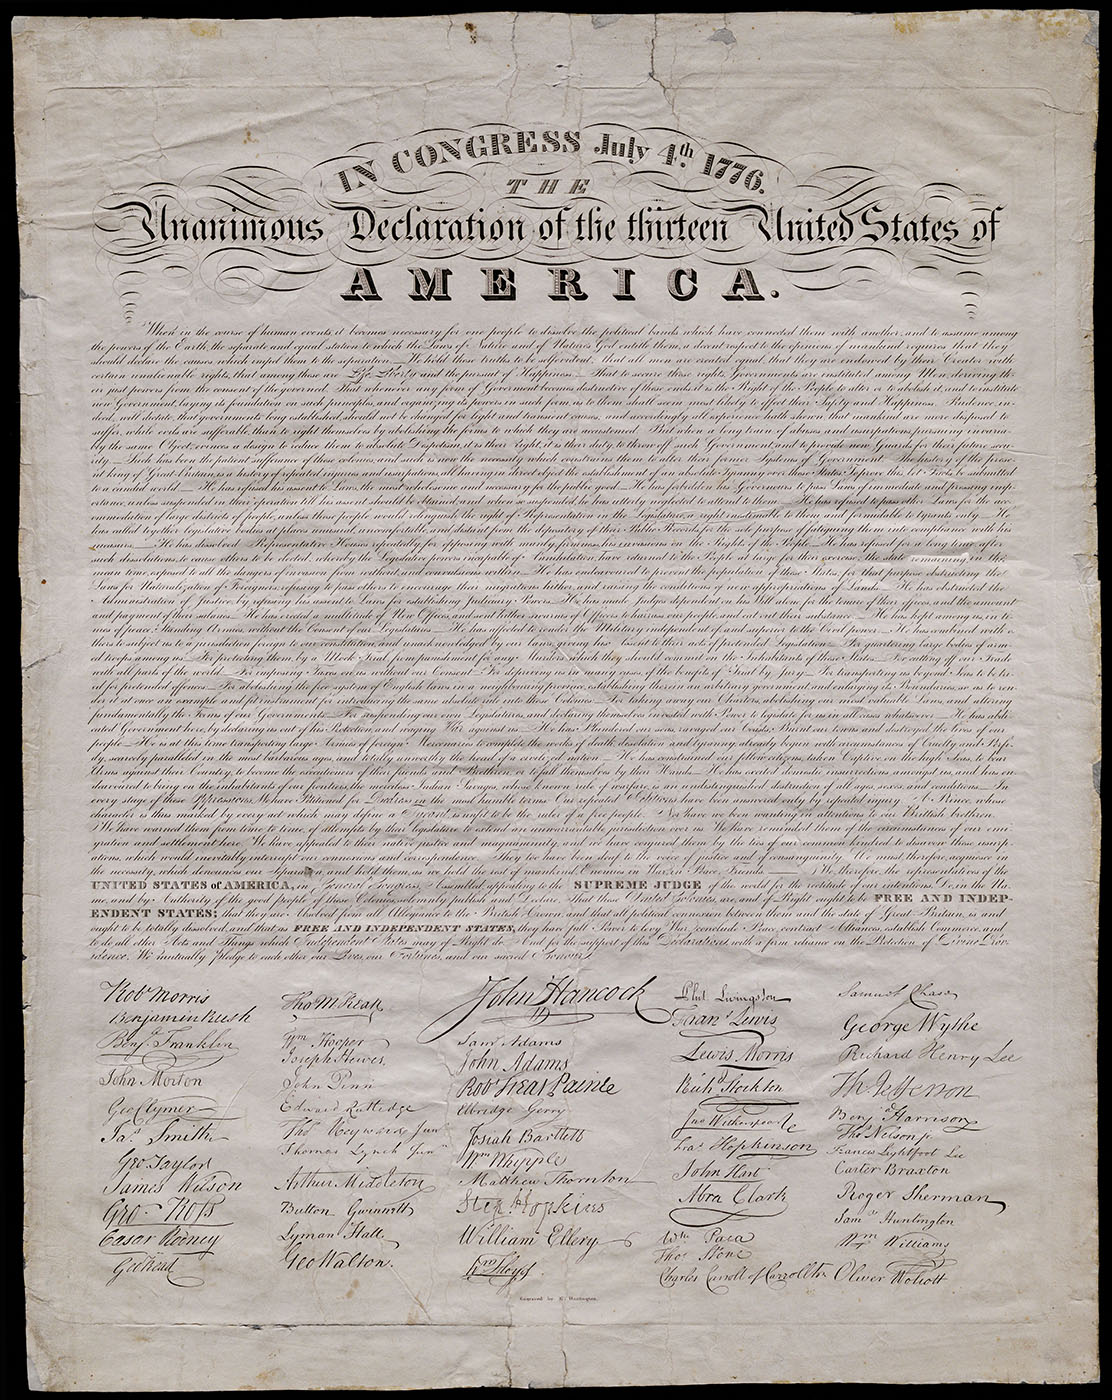 [Engraved copy of the Declaration of Independence] circa 1840 (The Gilder Lehrman Institute of American History, GLC04530) 